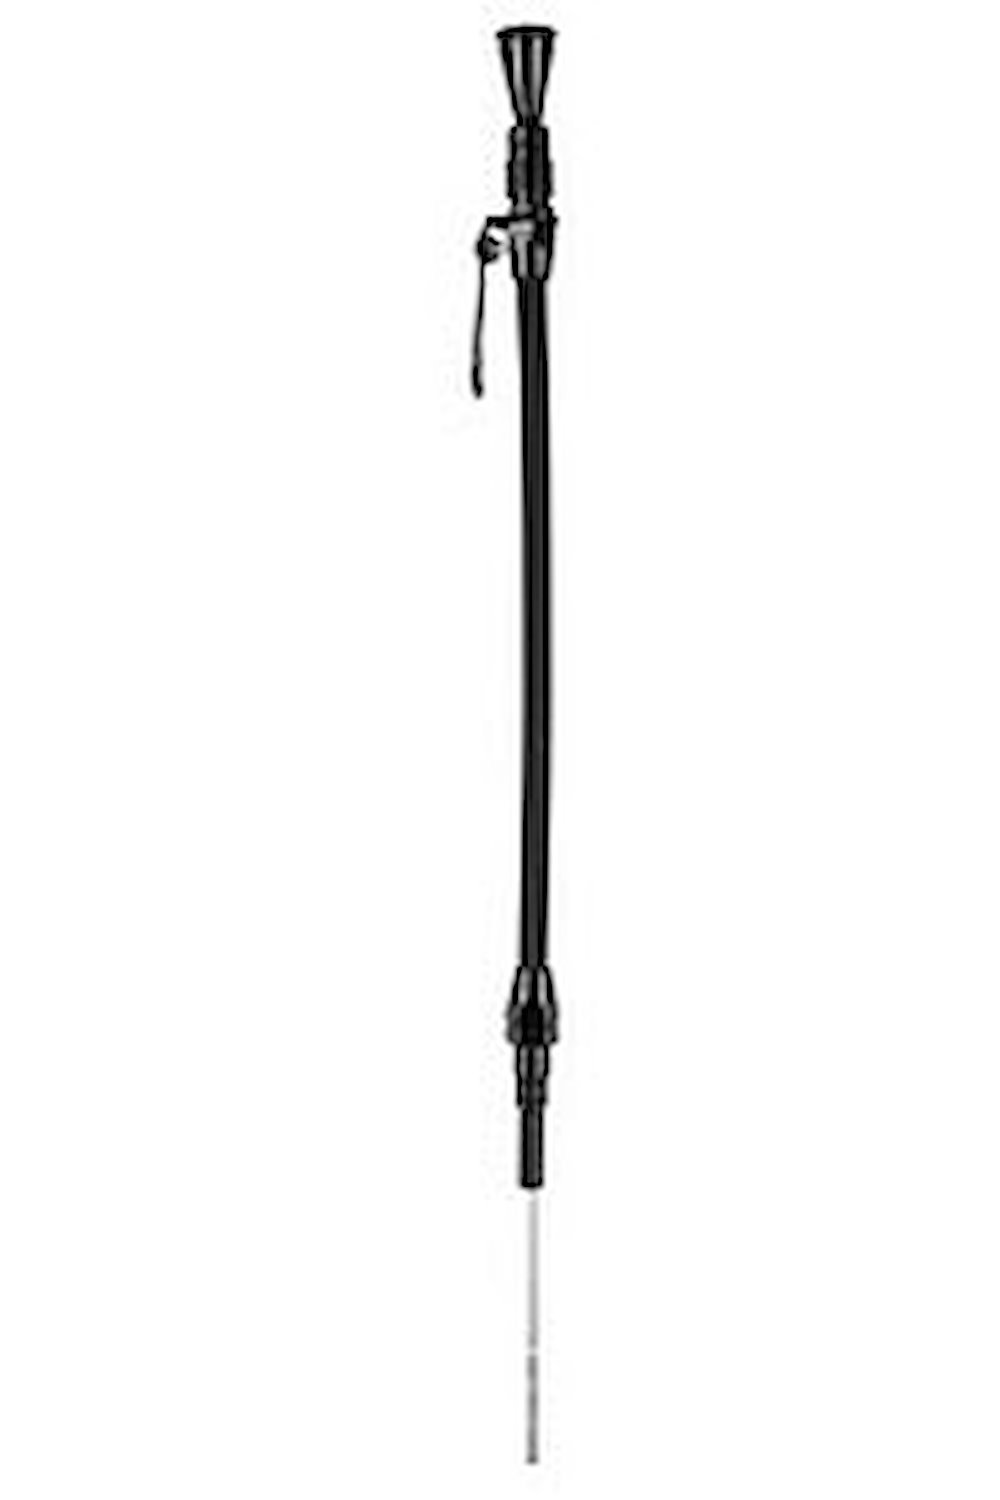 Anchor-Tight Locking Flexible Engine Dipstick 1962-69 Ford 289-302